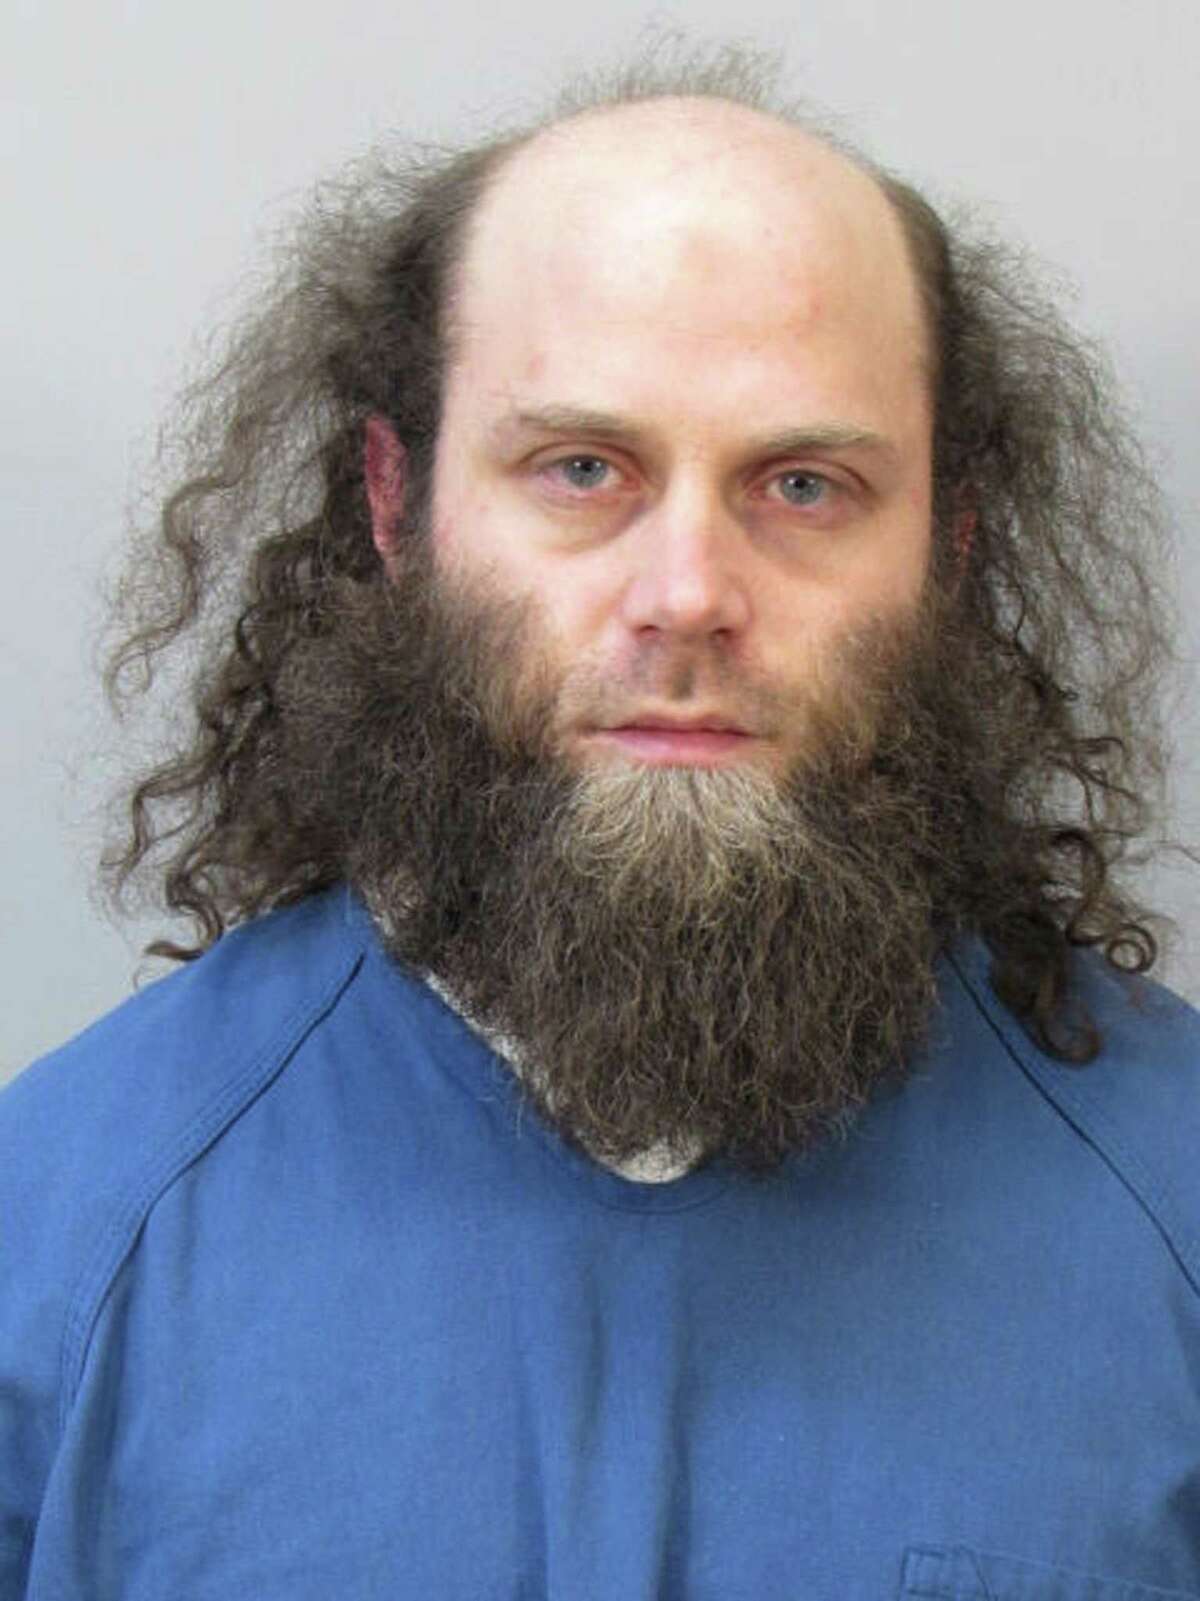 In this photo provided by the Dane County Sheriff’s Office, Joshua Van Haften, 34, appears as he is booked Wednesday, April 8, 2015, in Madison, Wisc. Van Haften, accused of traveling to Turkey as part of a failed attempt to join the Islamic State in Syria, was ordered held without bond Thursday for trying to aid a terrorist group.